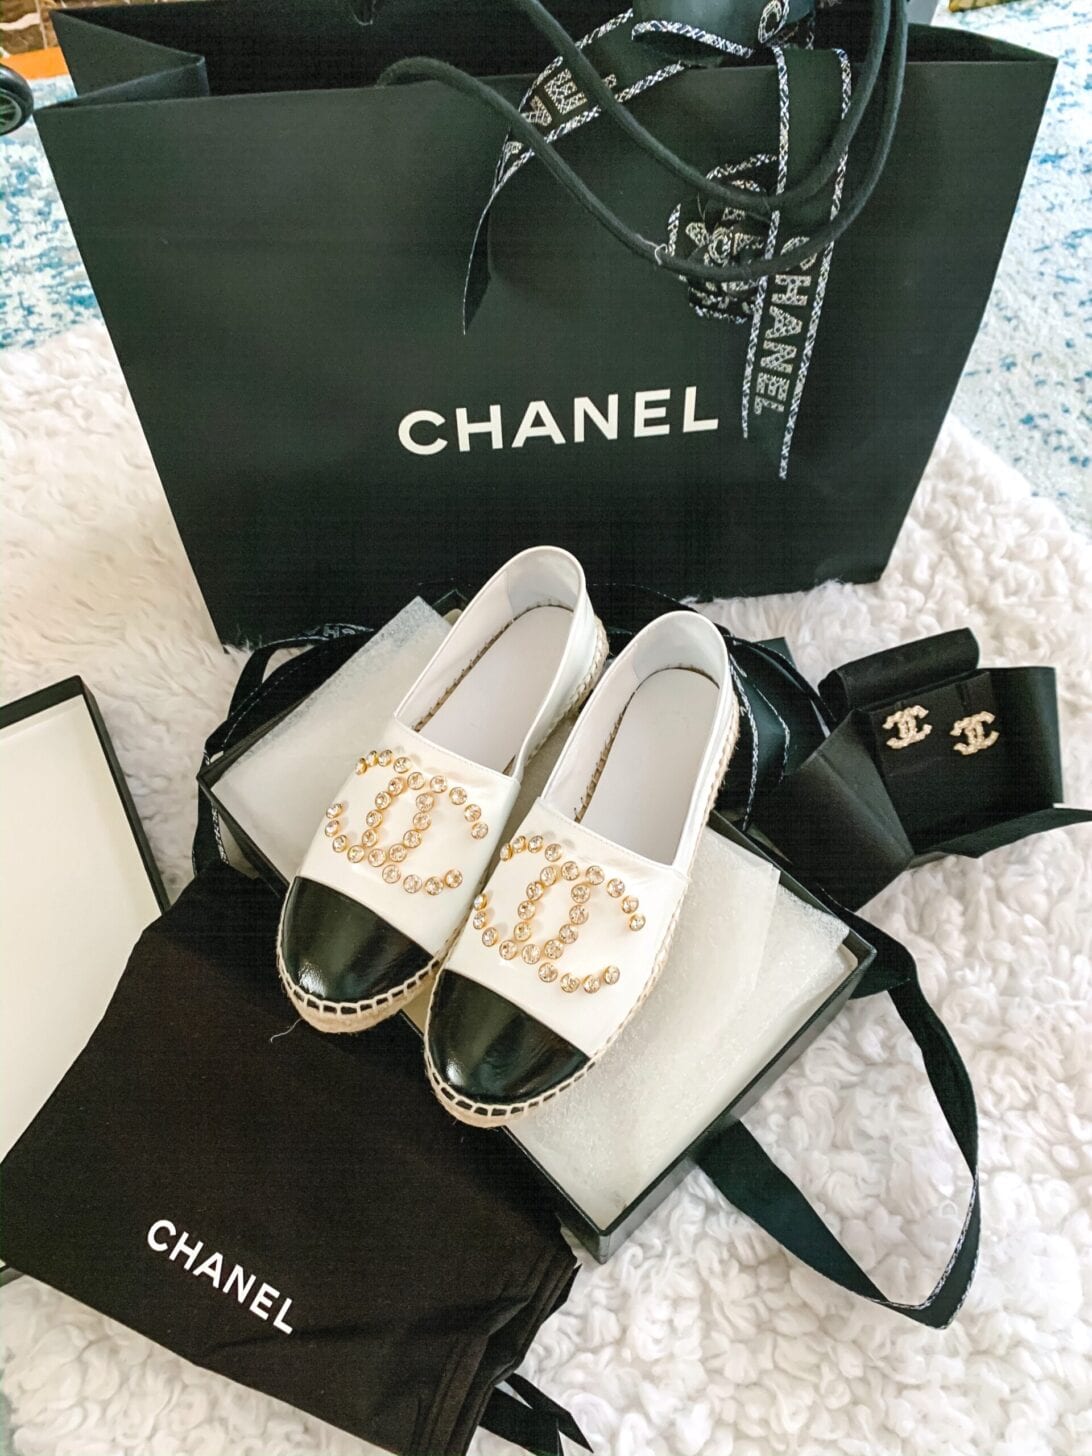 chanel cruise 2020, Chanel espadrilles, black and white calf skin espadrilles, Chanel unboxing, Chanel earrings, Chanel bag, Chanel shoes, bling chanel espadrilles 